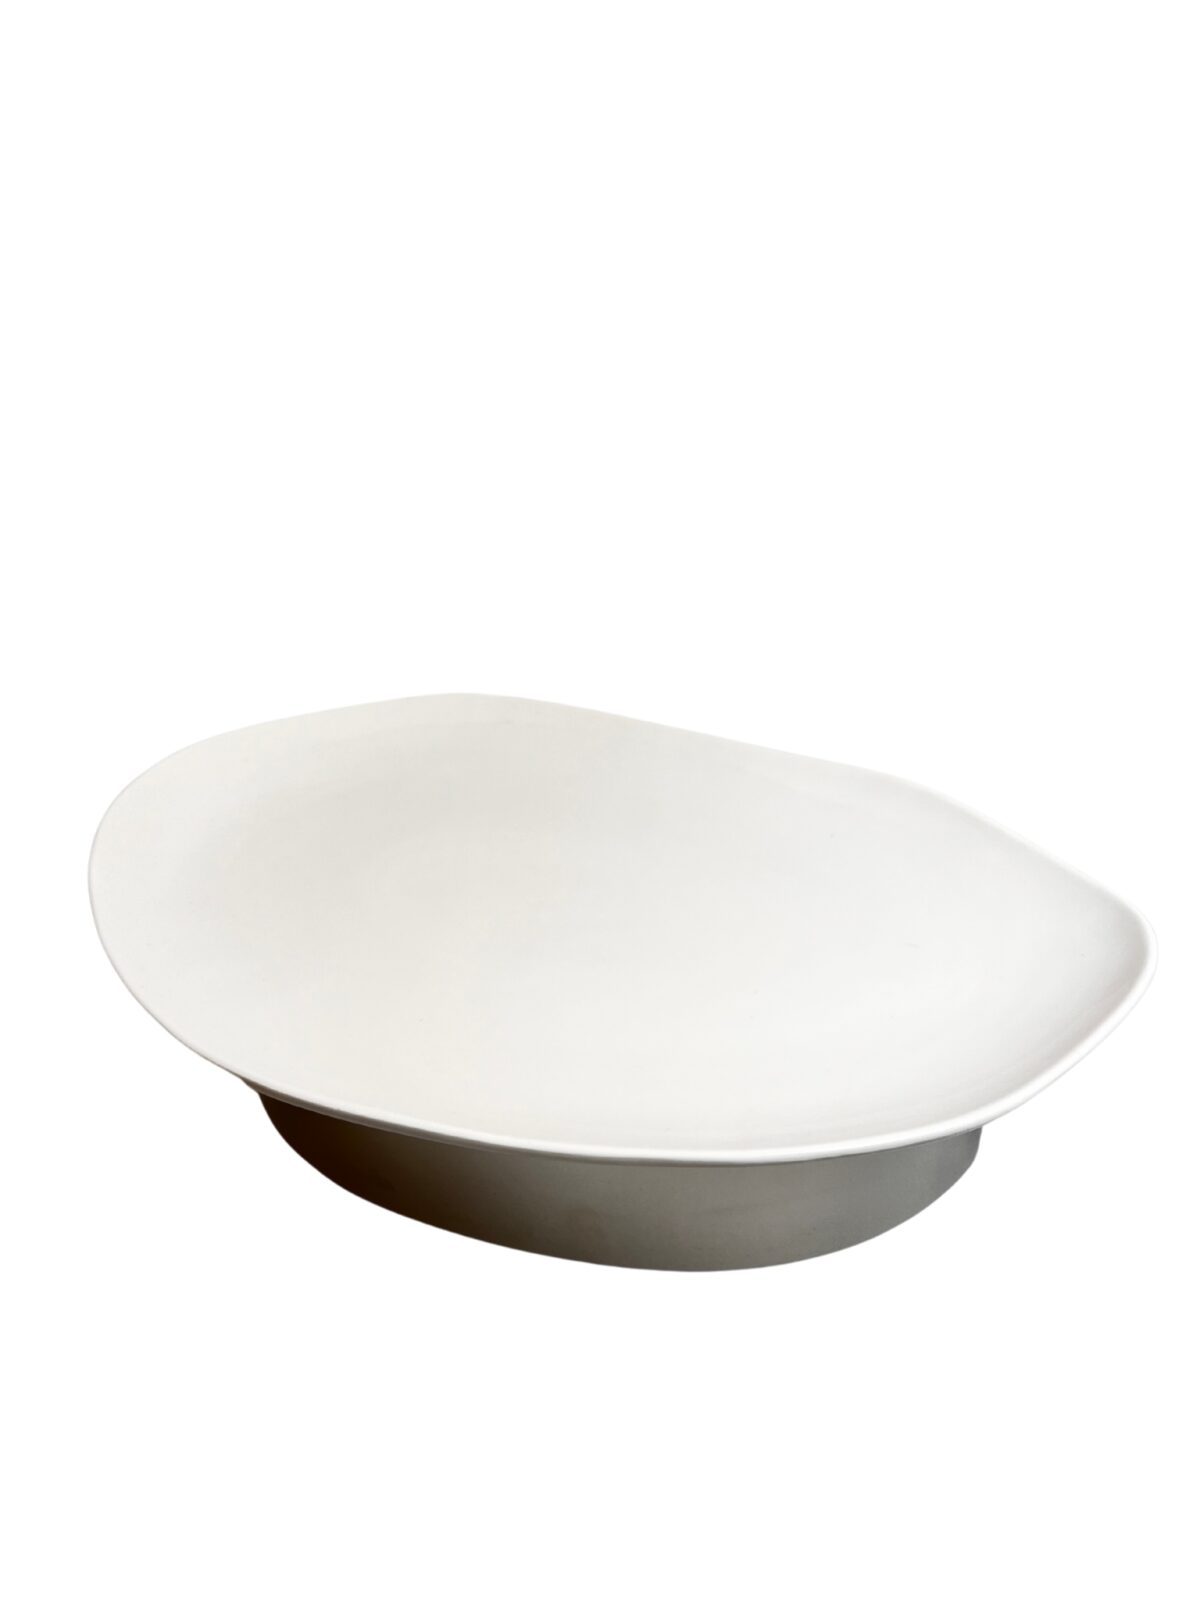 Rabwa Stand with Small Porcelain Plate